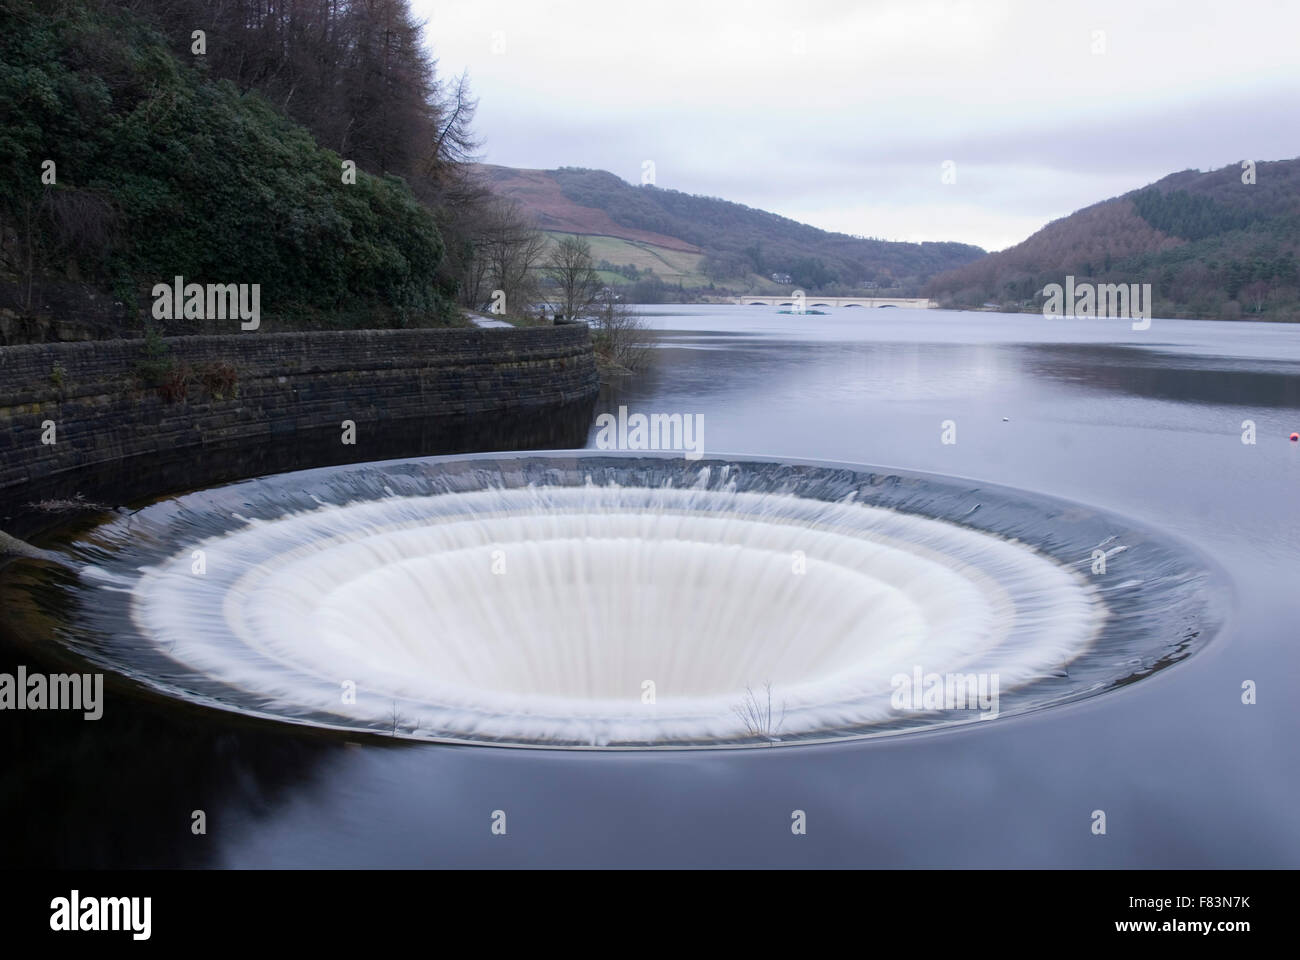 DERBYSHIRE UK - 06 Oct : Ladybower reservoir bellmouth overflow (or plug hole) and draw off tower on 16 Feb 2014 in the Peak Dis Stock Photo